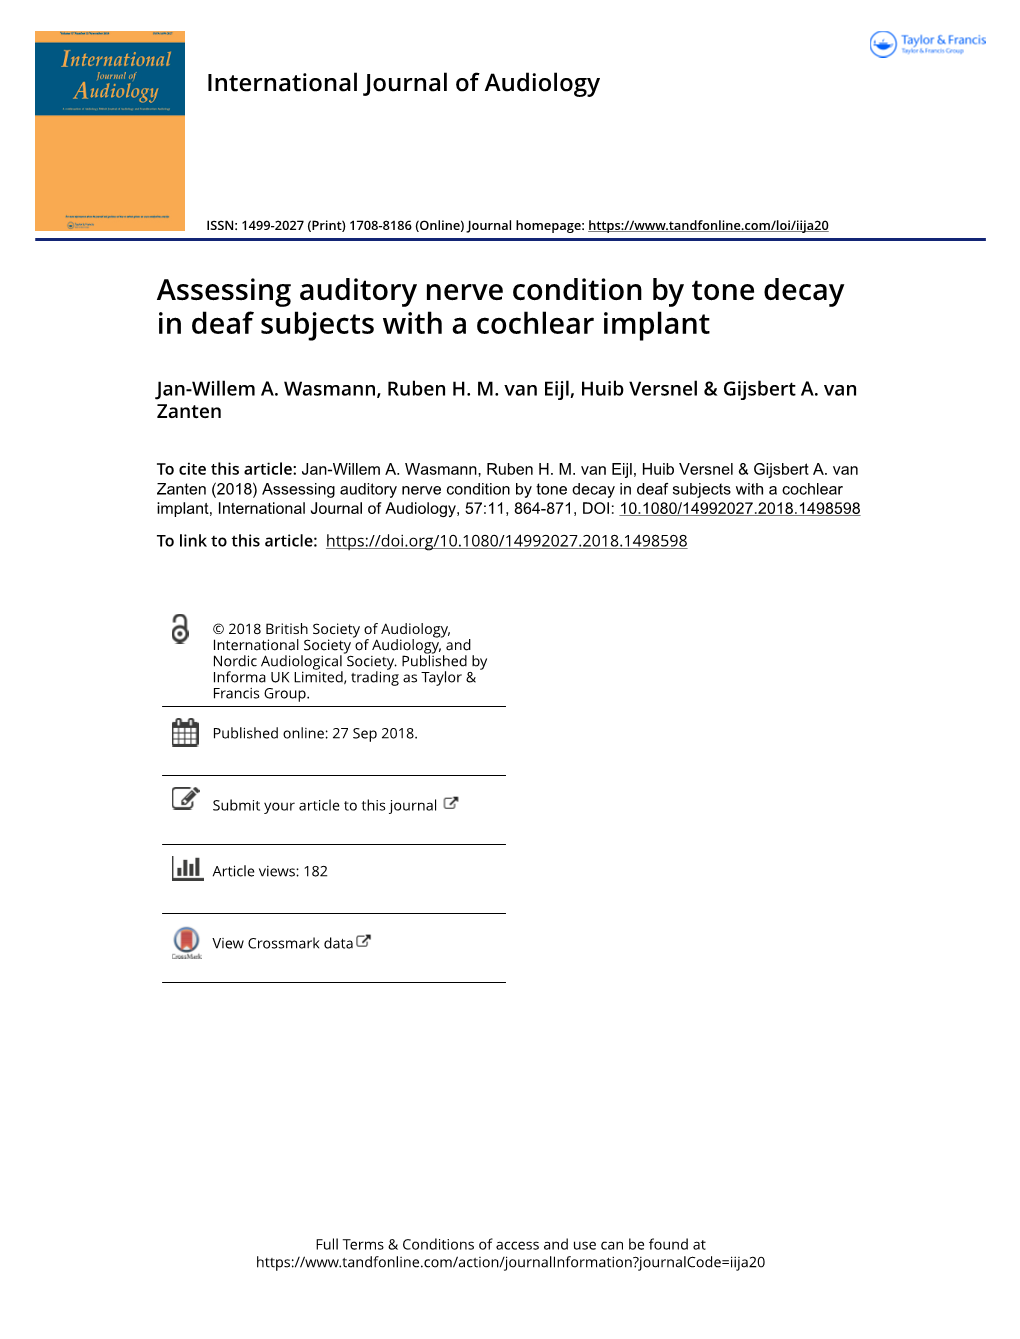 Assessing Auditory Nerve Condition by Tone Decay in Deaf Subjects with a Cochlear Implant